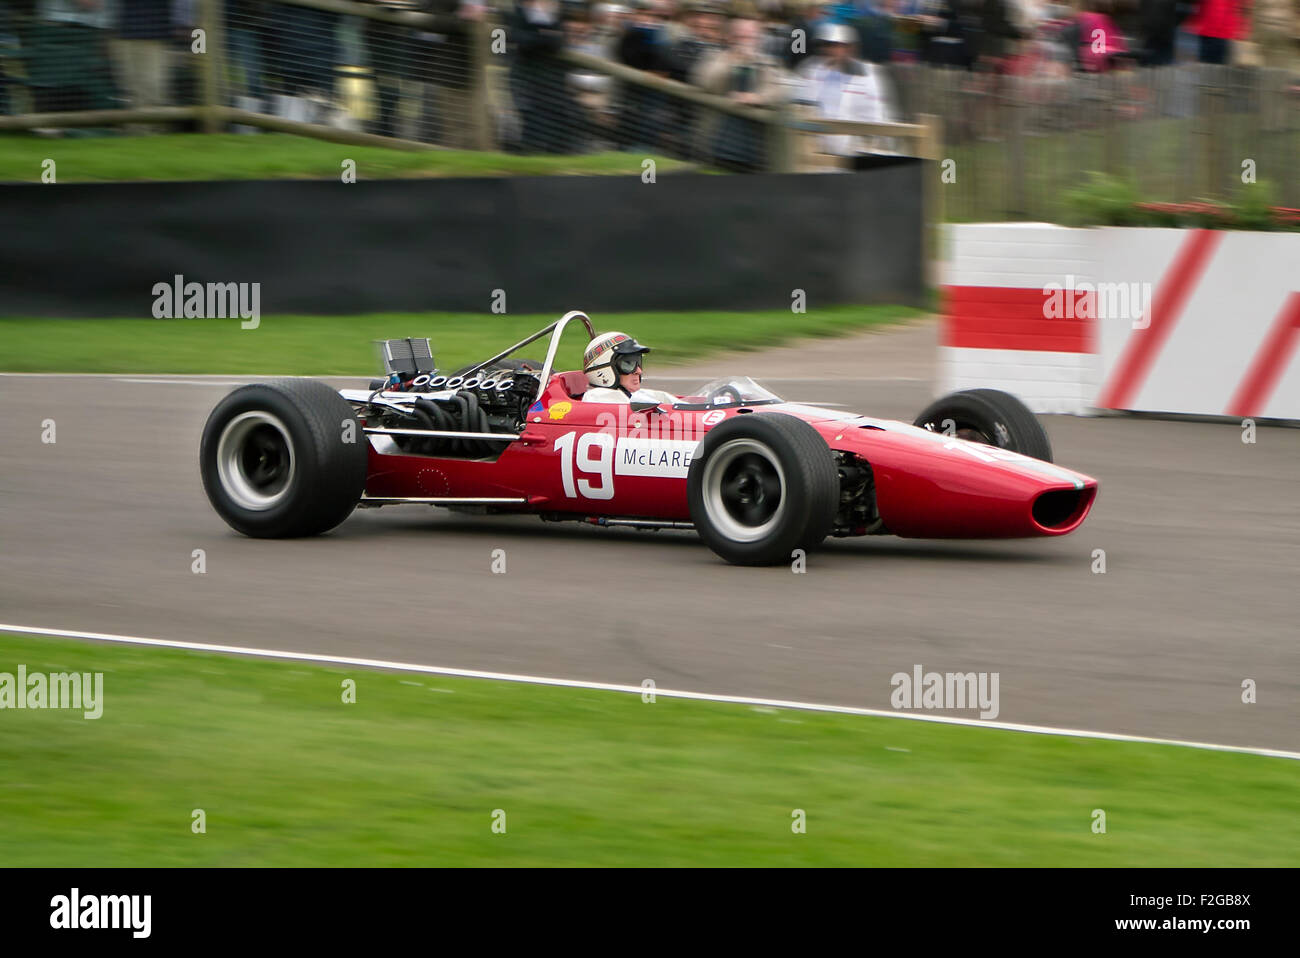 Sir Jackie Stewart driving an Ex-Bruce Mclaren F! car from the 1960's at the Goodwood Revival meeting Stock Photo